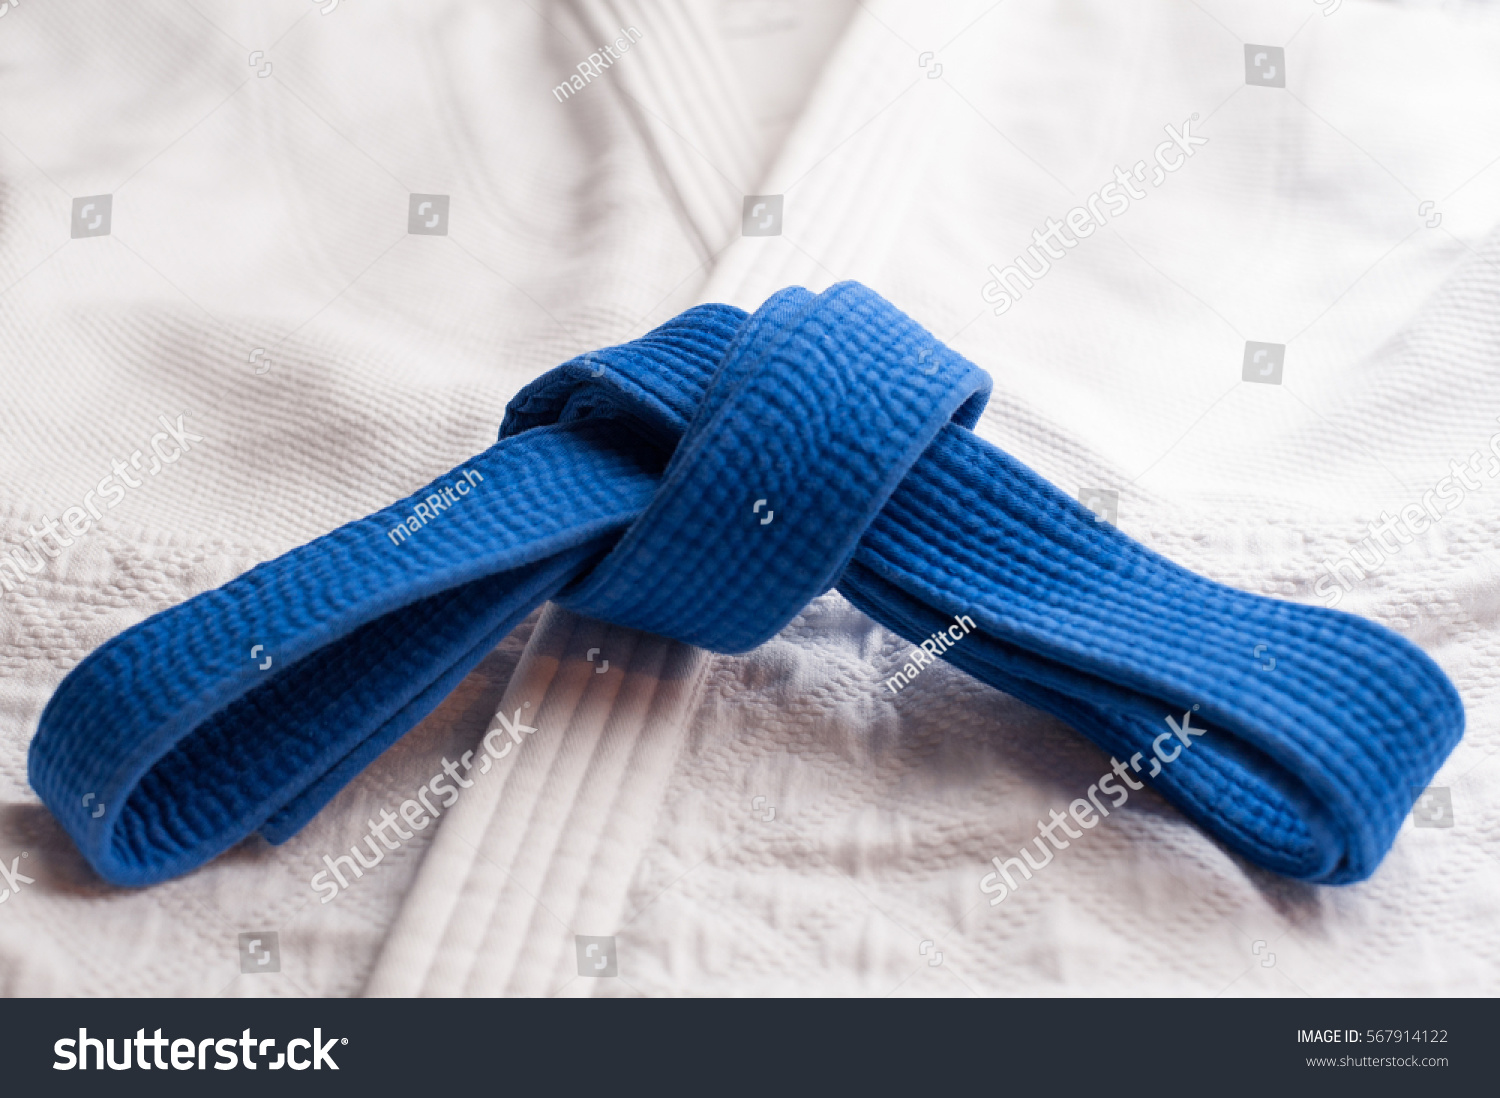 Blue judo, aikido or karate belt tied in a knot with white kimono in background #567914122